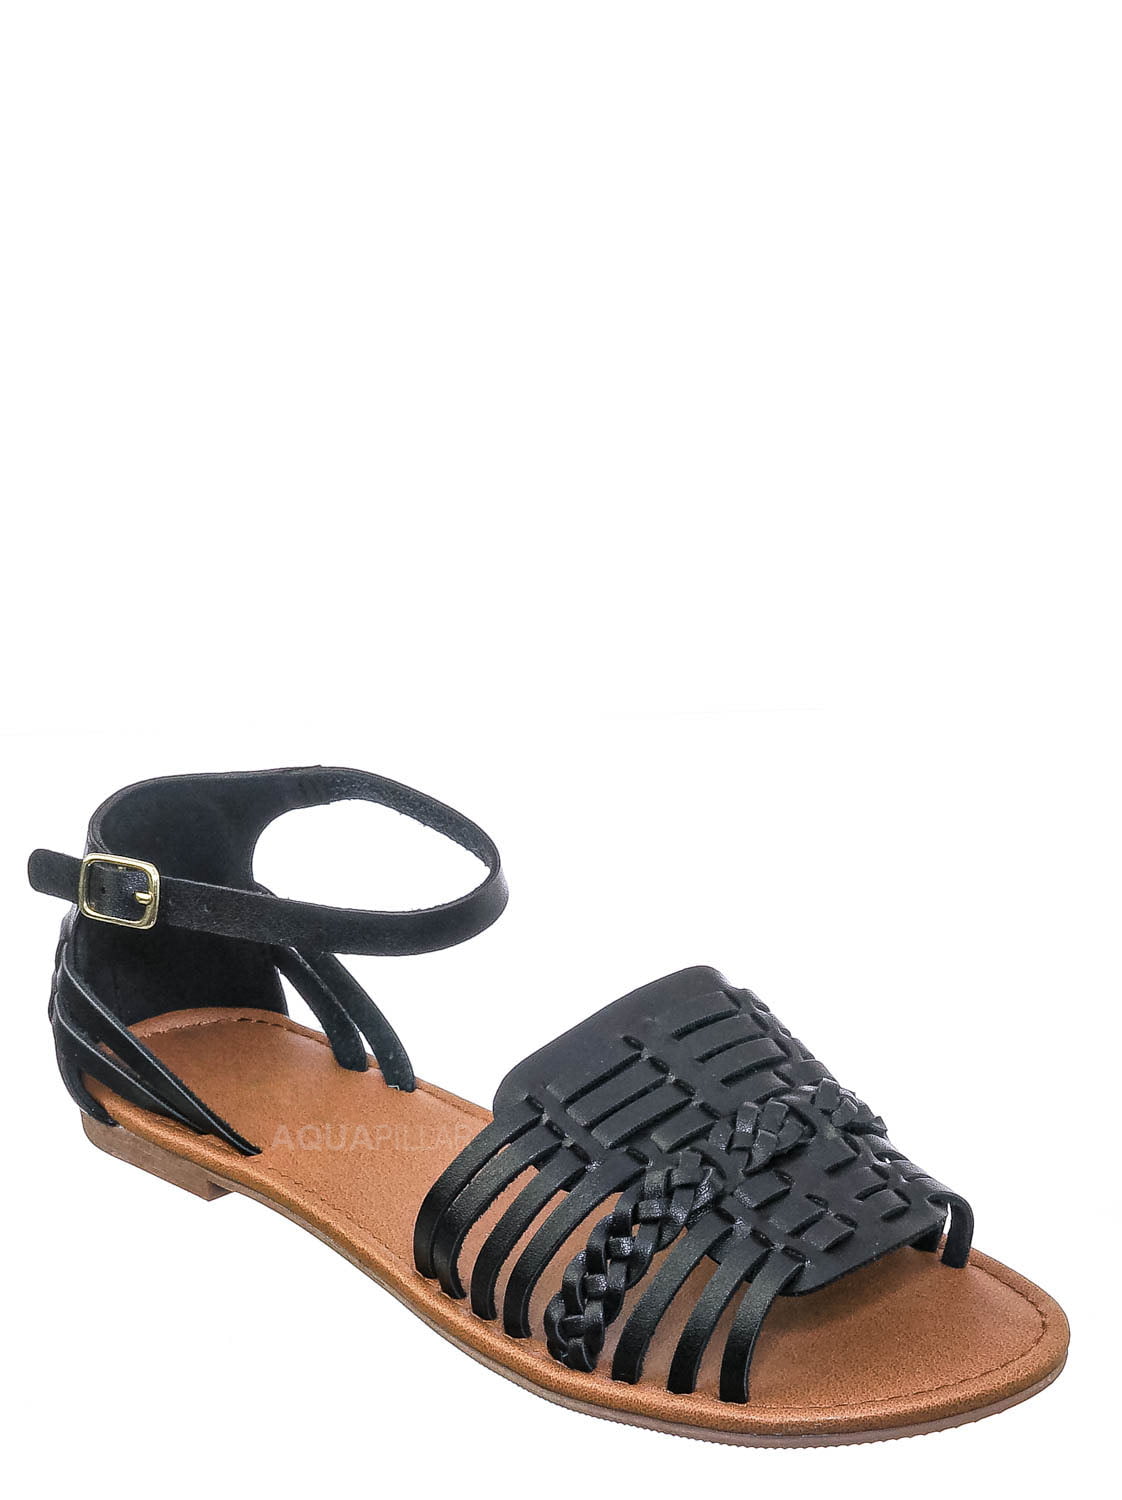 Punktlighed Kontrovers Overskyet Candle Woven Fisherman Huaraches Flat Peep Toe Sandal, Strappy Cage  Gladiators (Woman) - Walmart.com